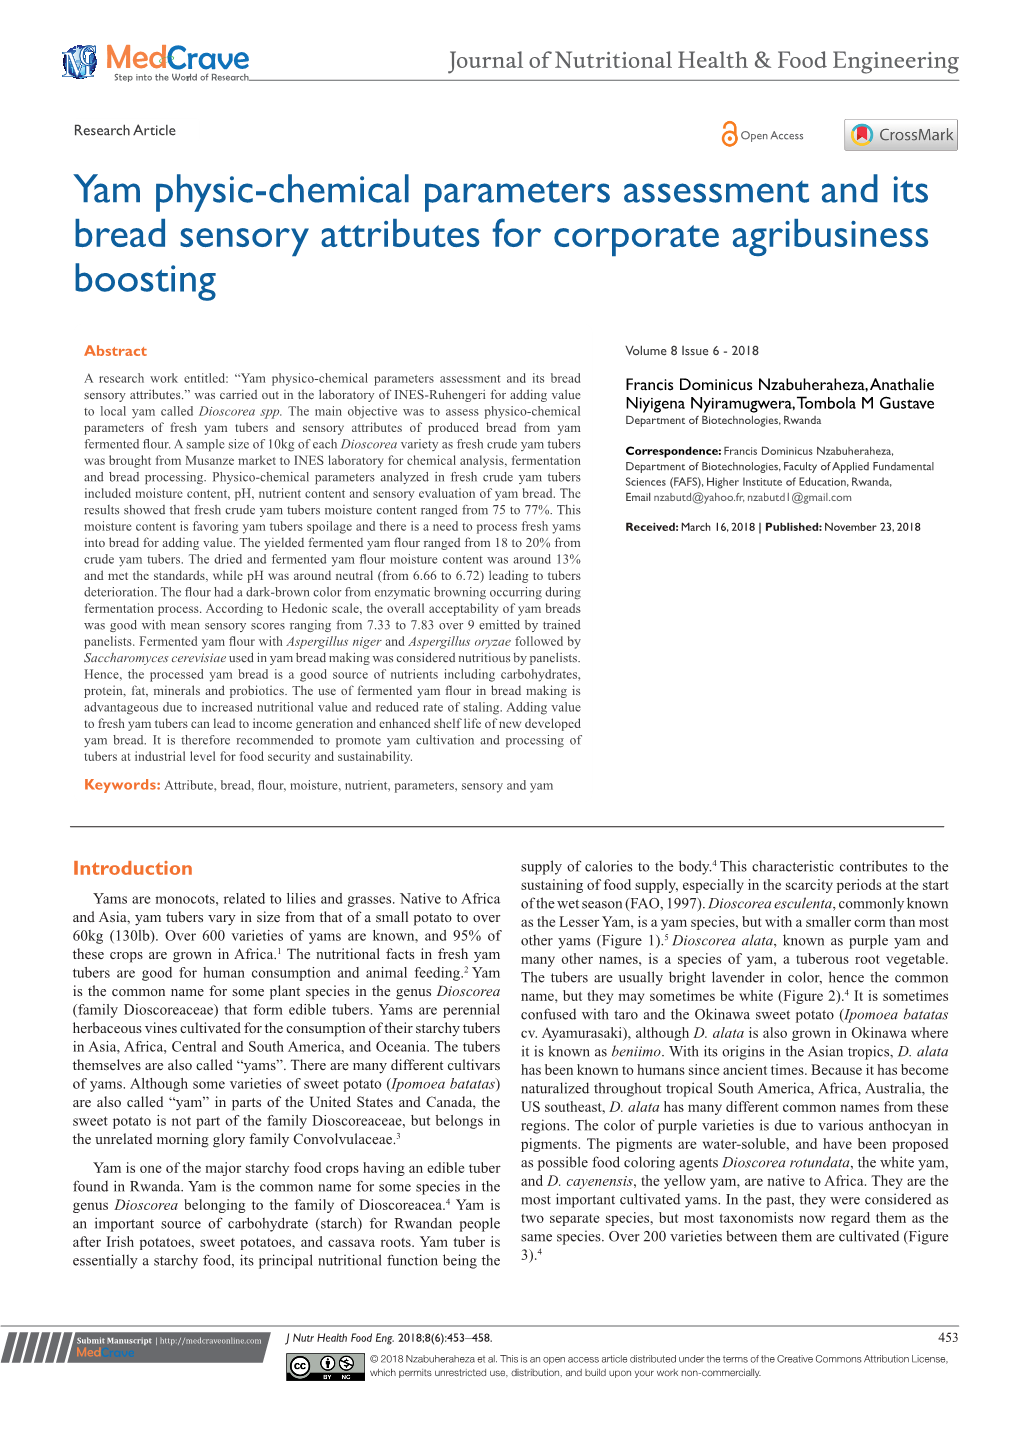 Yam Physic-Chemical Parameters Assessment and Its Bread Sensory Attributes for Corporate Agribusiness Boosting